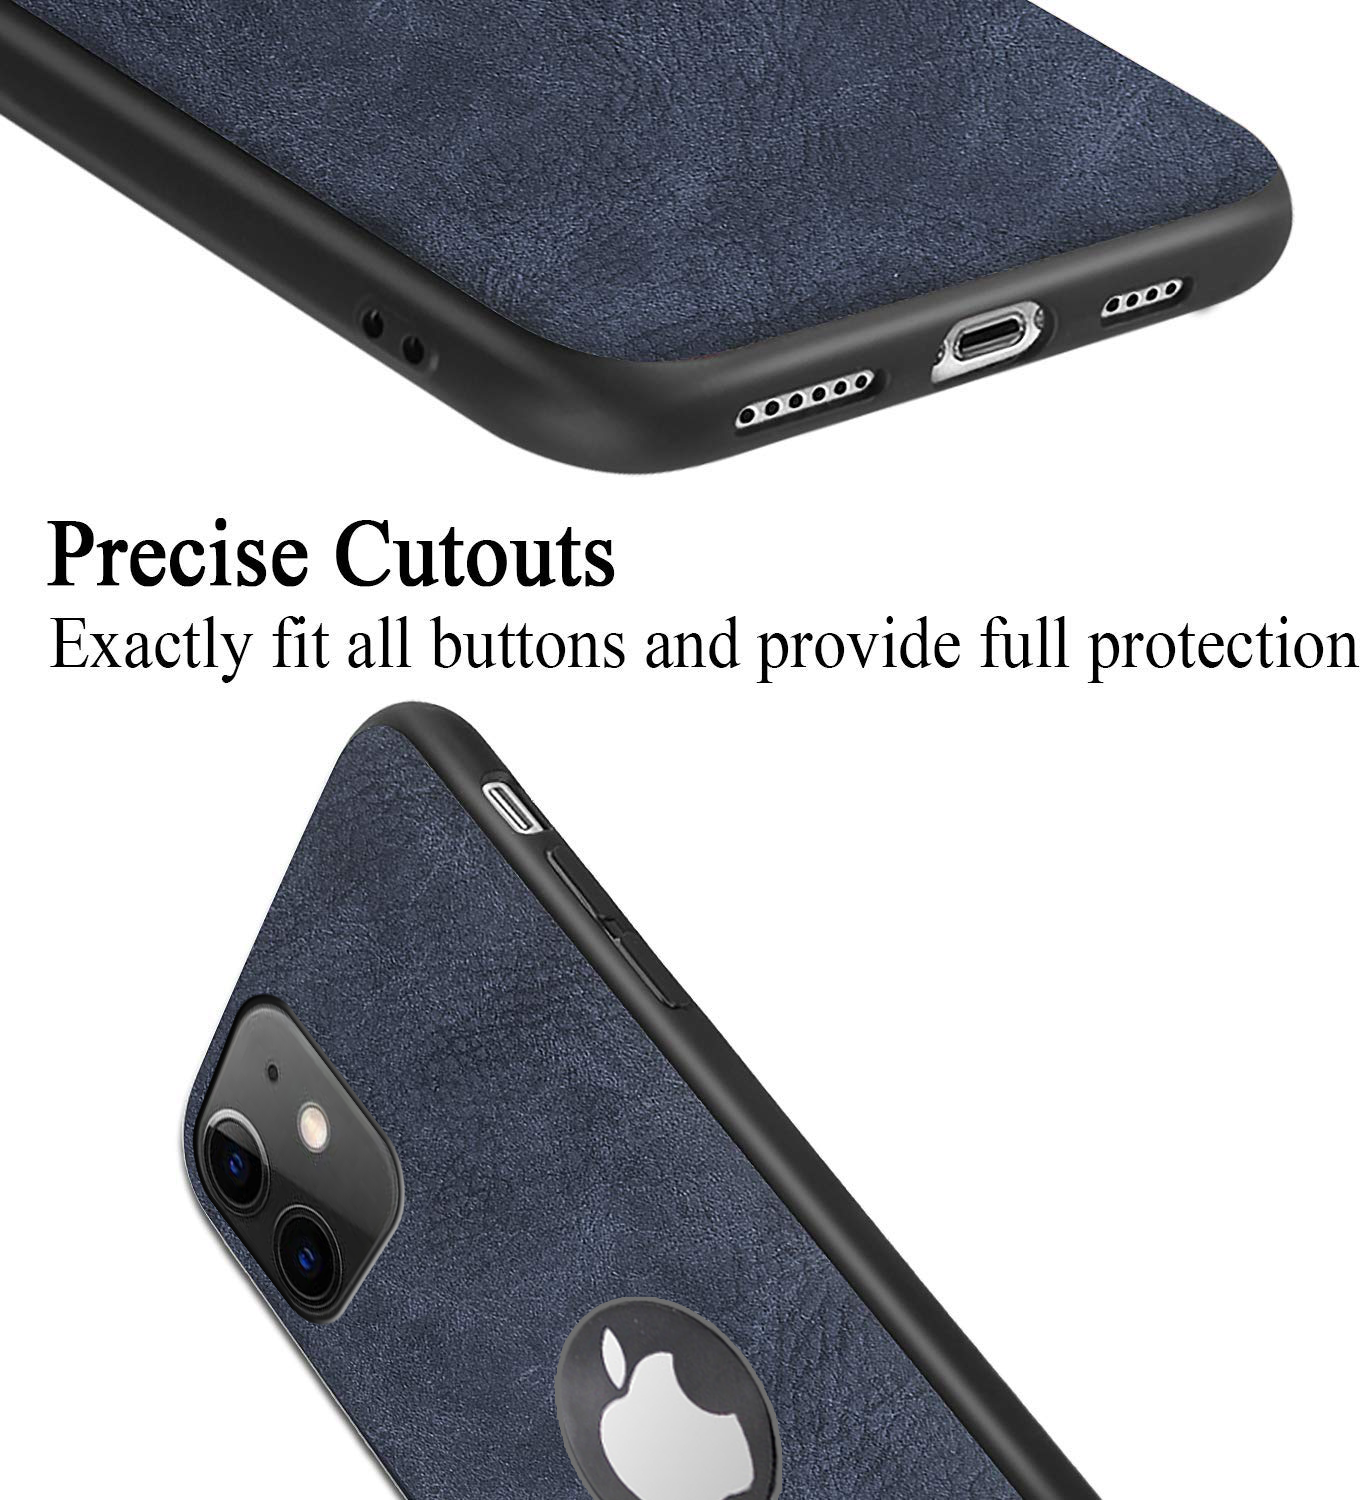 Excelsior Premium PU Leather Back Cover case For Apple iPhone 12 Mini